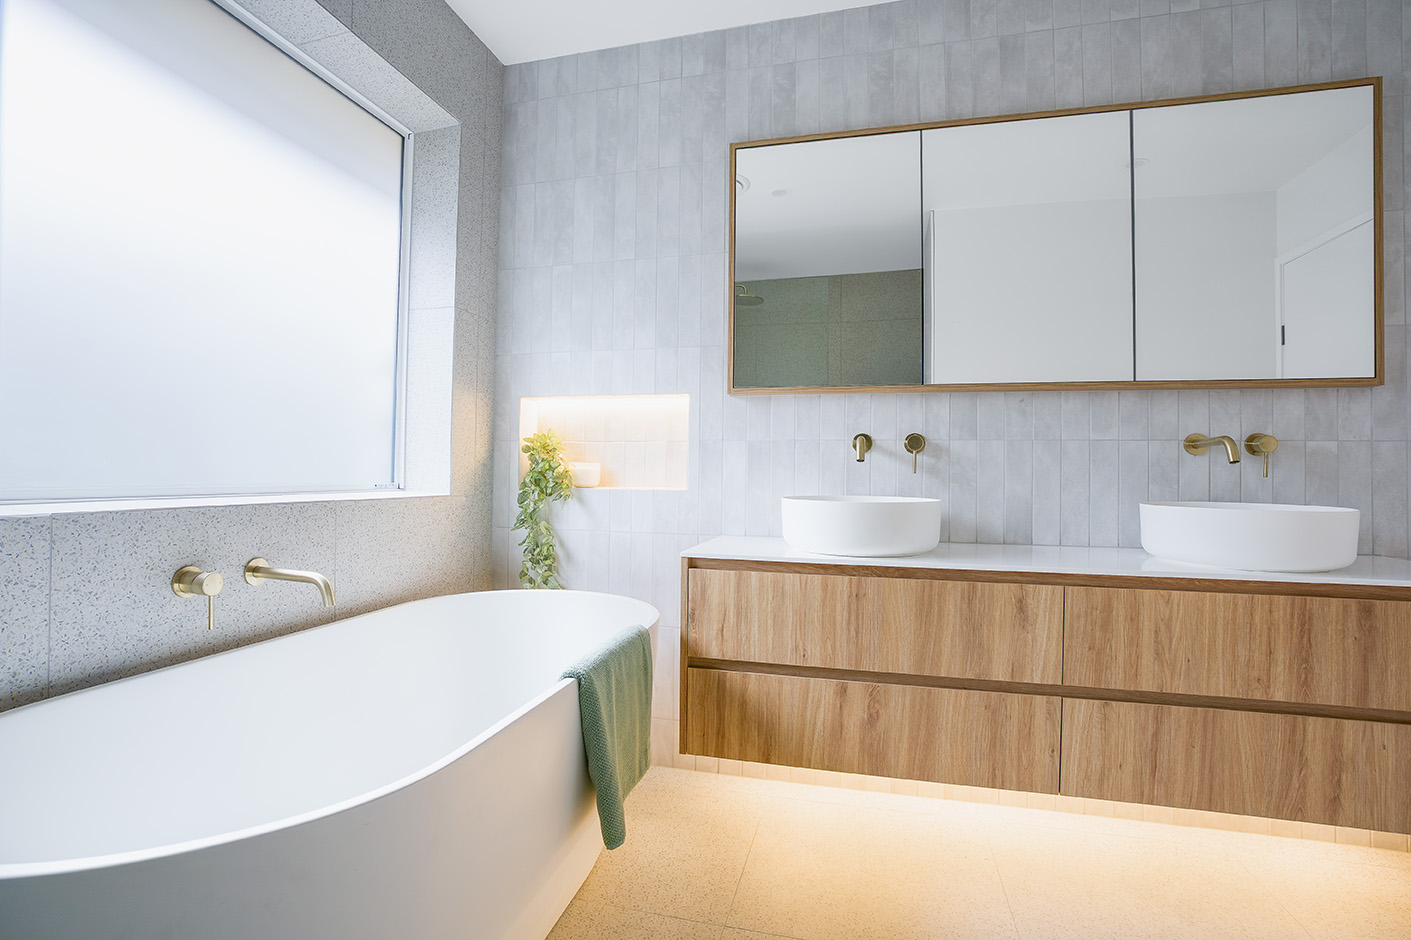 6 Ways To Turn Your Small Bathroom Into A Luxurious Shower Destination